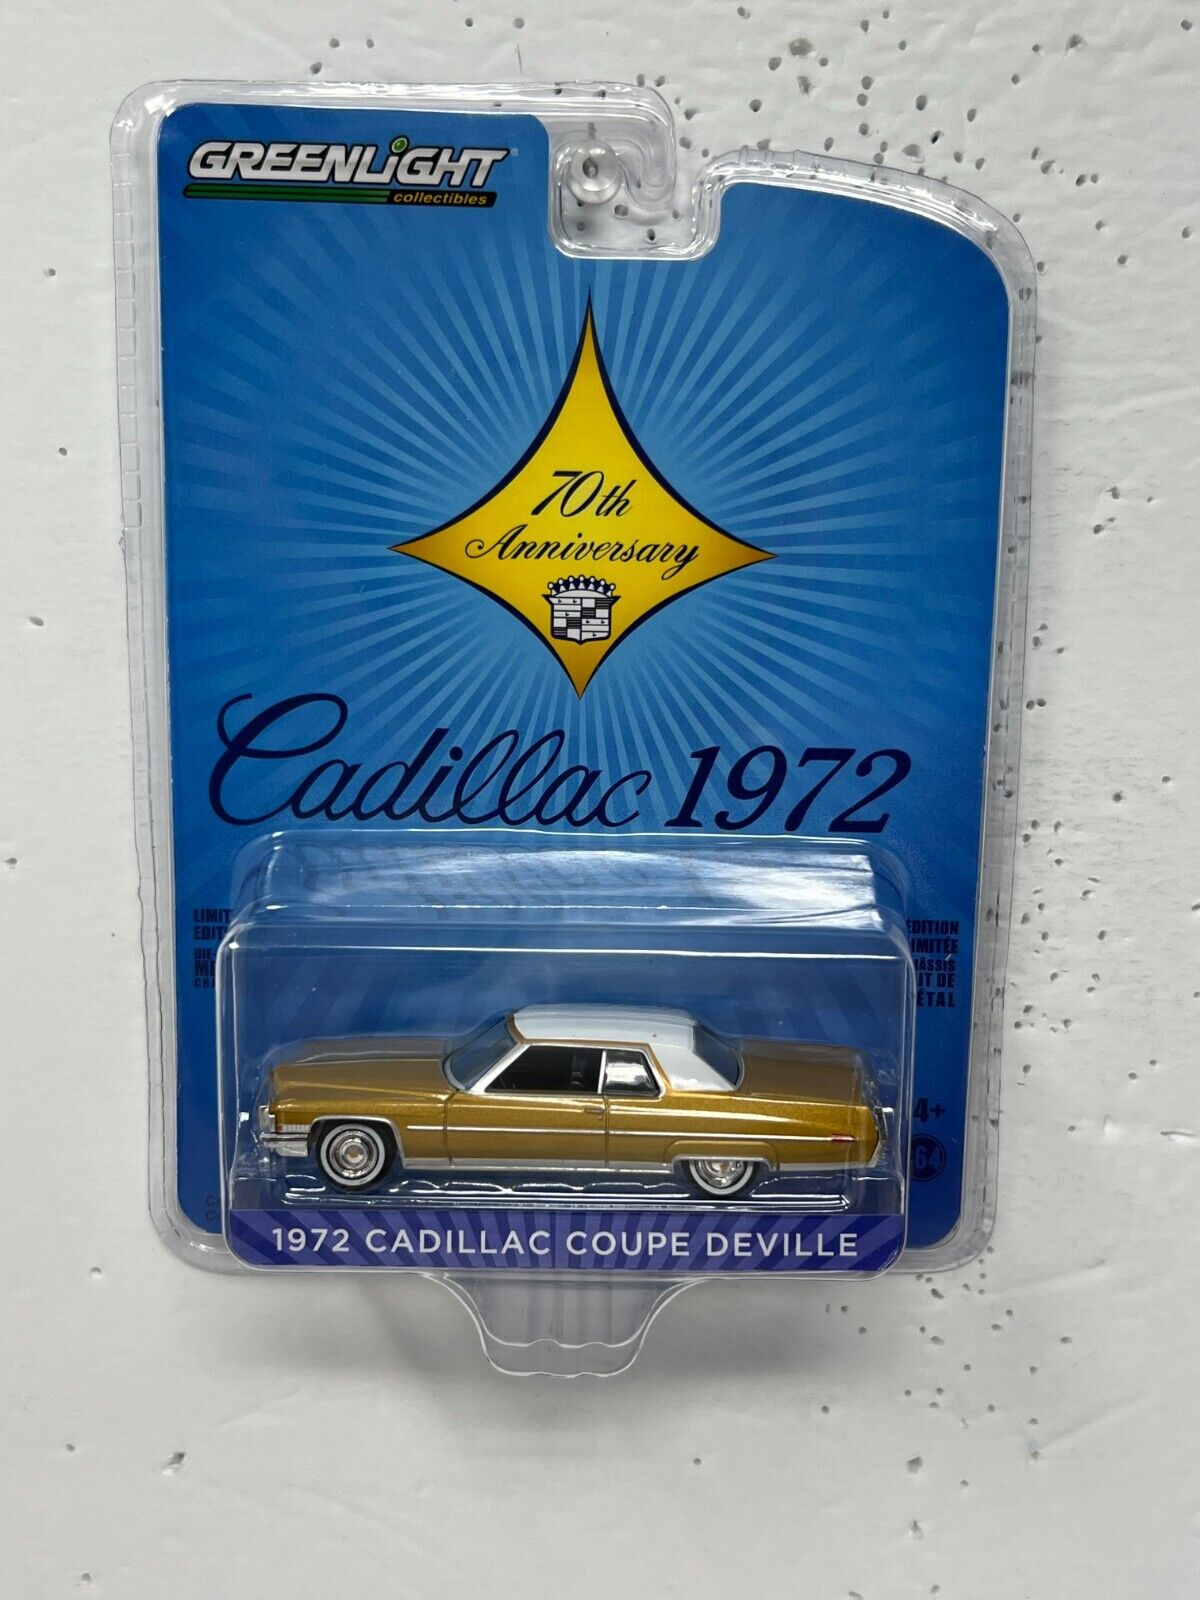 Greenlight Cadillac 70th Anniversary 1972 Cadillac Coupe Deville 1:64 Diecast